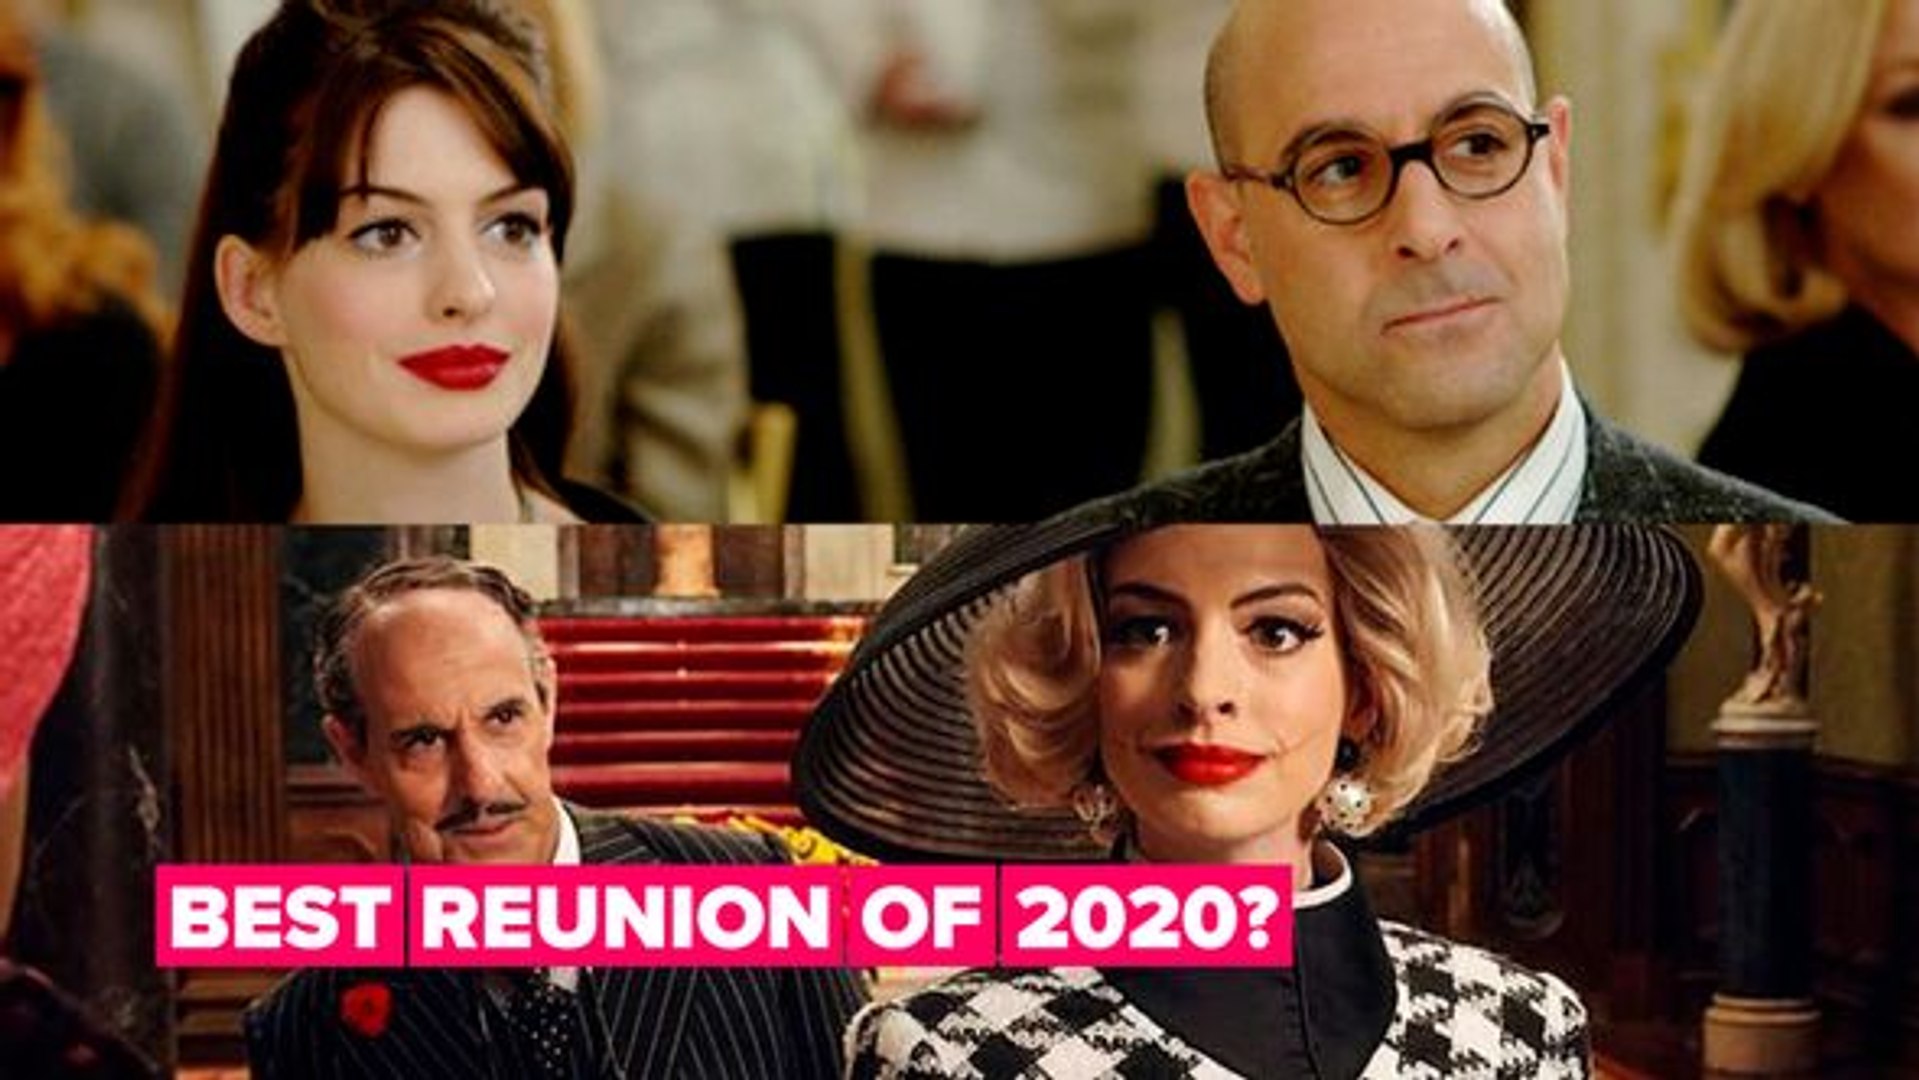 The Witches features a Devil Wears Prada reunion we all needed in 2020 -  video Dailymotion